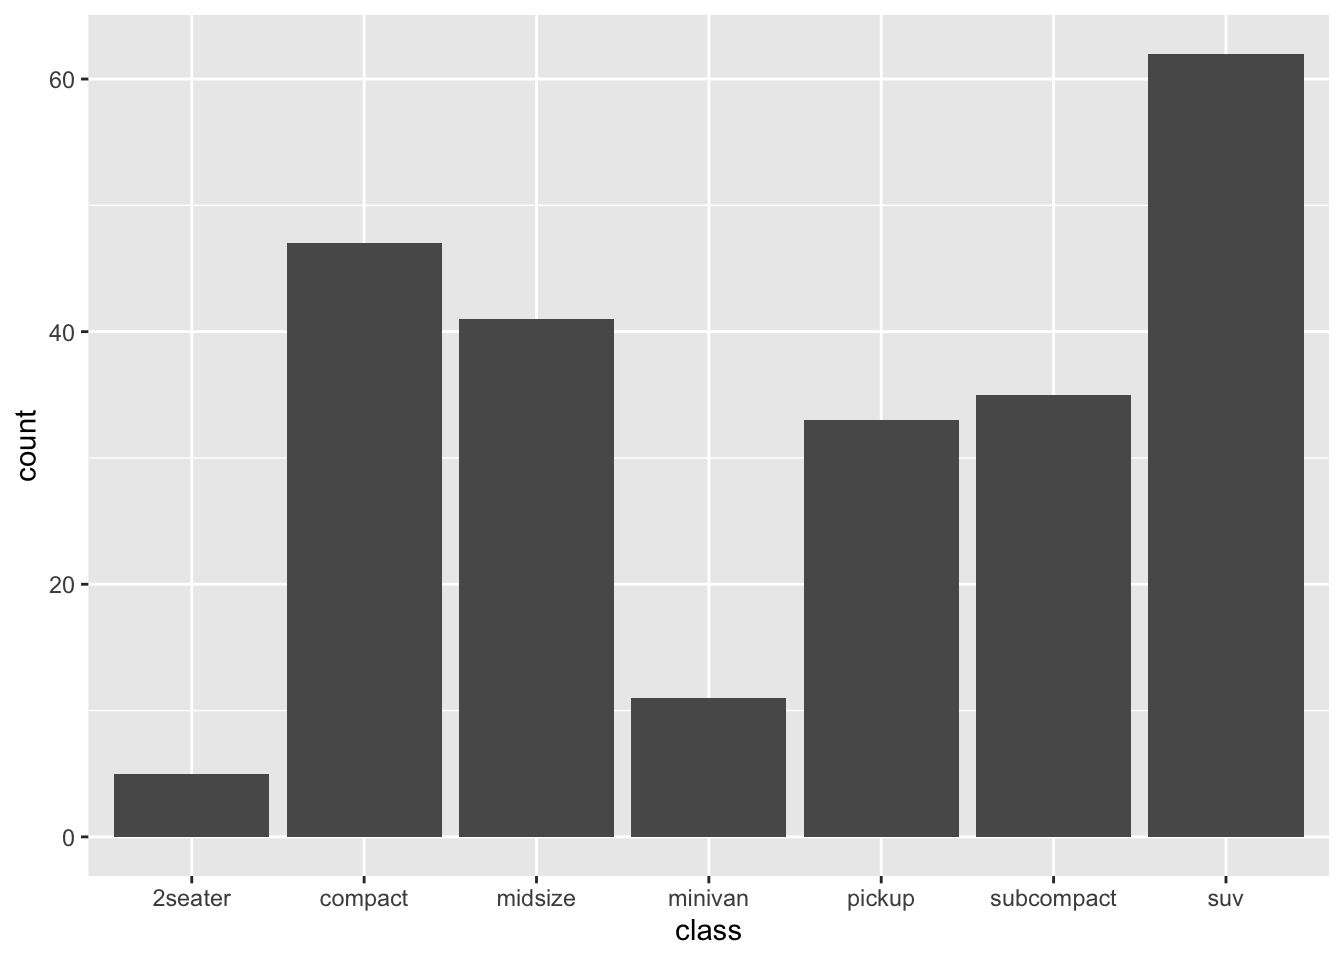 Example of a simple call to `ggplot` showing counts of vehicle classes from the `mpg` dataframe.